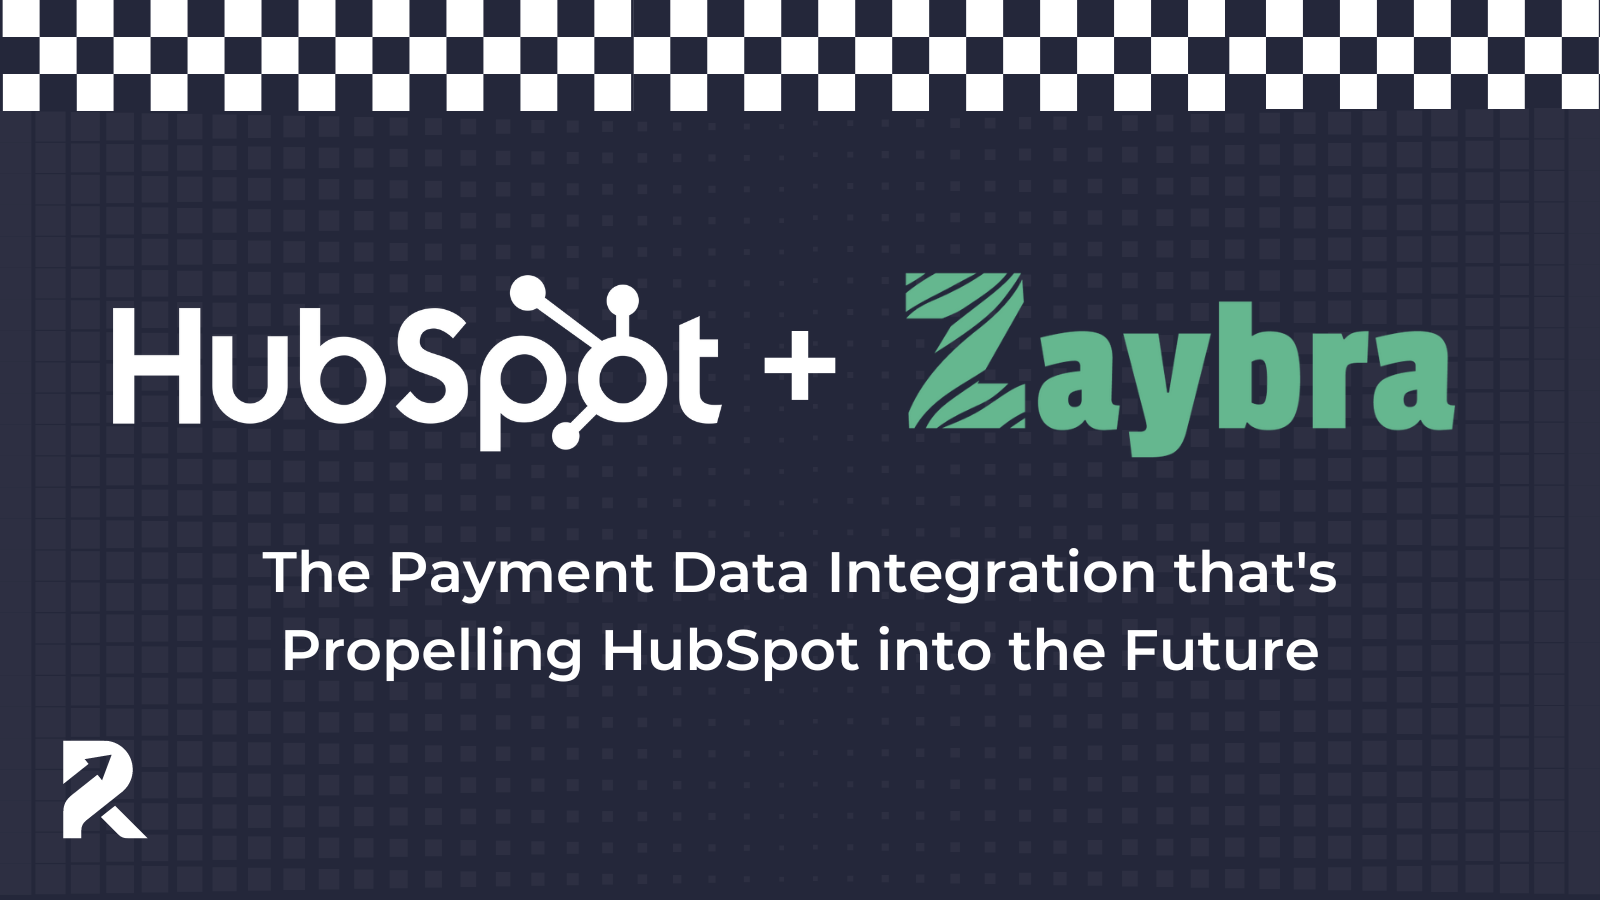 How Zaybra’s Payment Data Is Propelling HubSpot into the Future